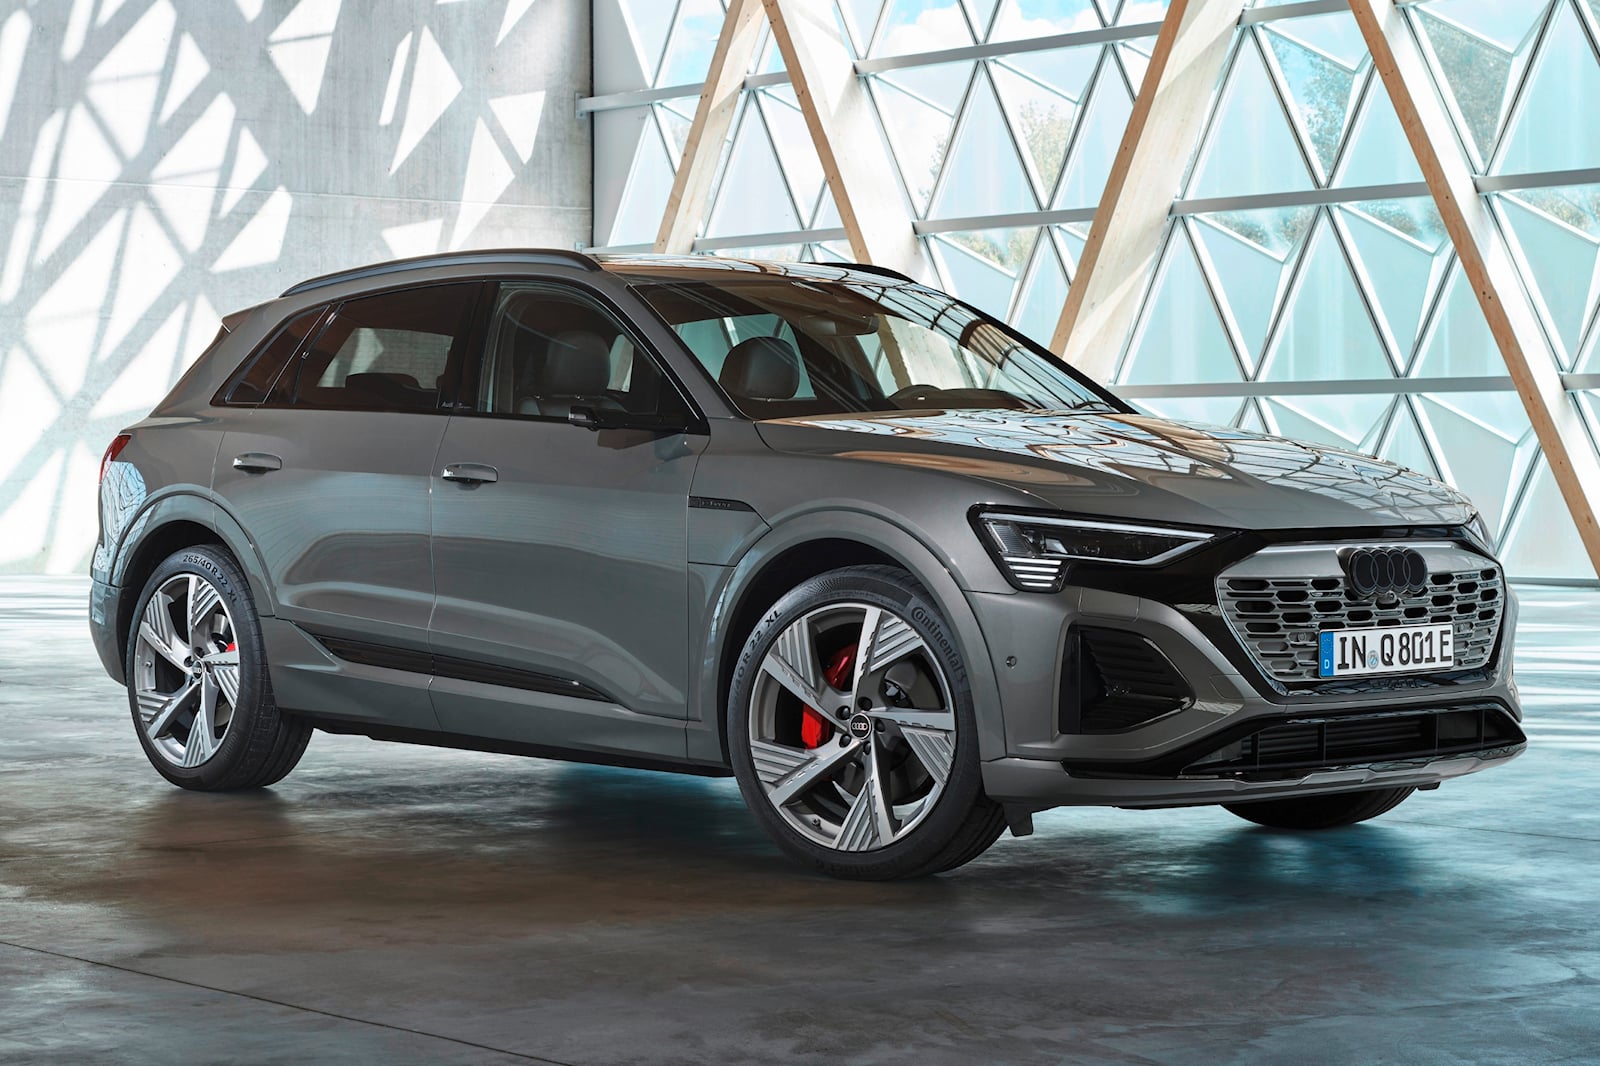 New Audi Q8 etron And Q8 Sportback etron Debut As The etron’s